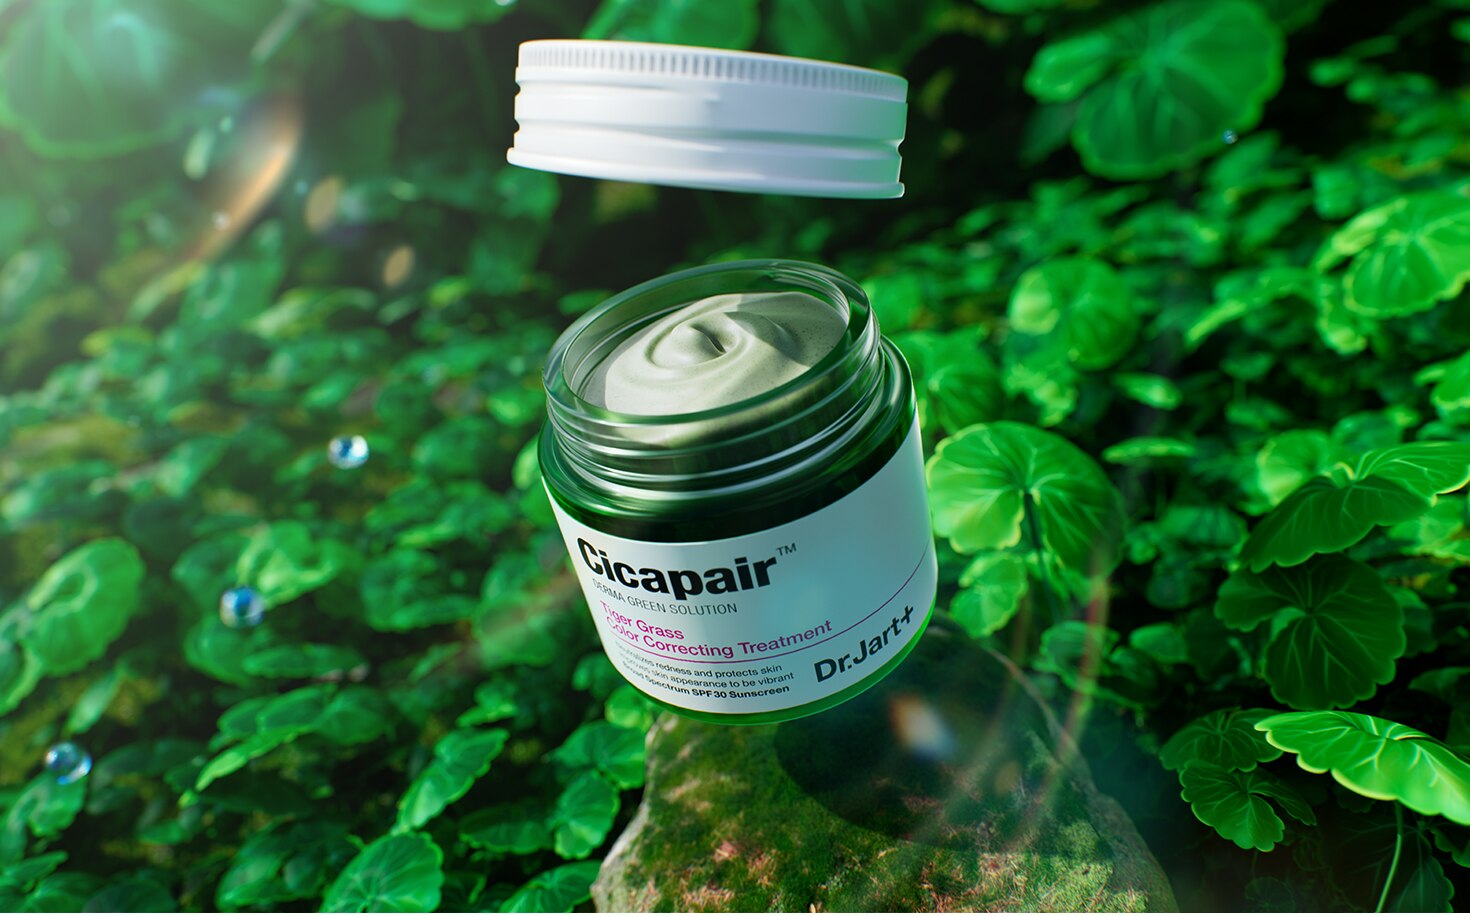 Cicapair Camo Drops bottle and Color Correcting Treatment jar with ombre back drop. Open containers reveal smooth, green texture